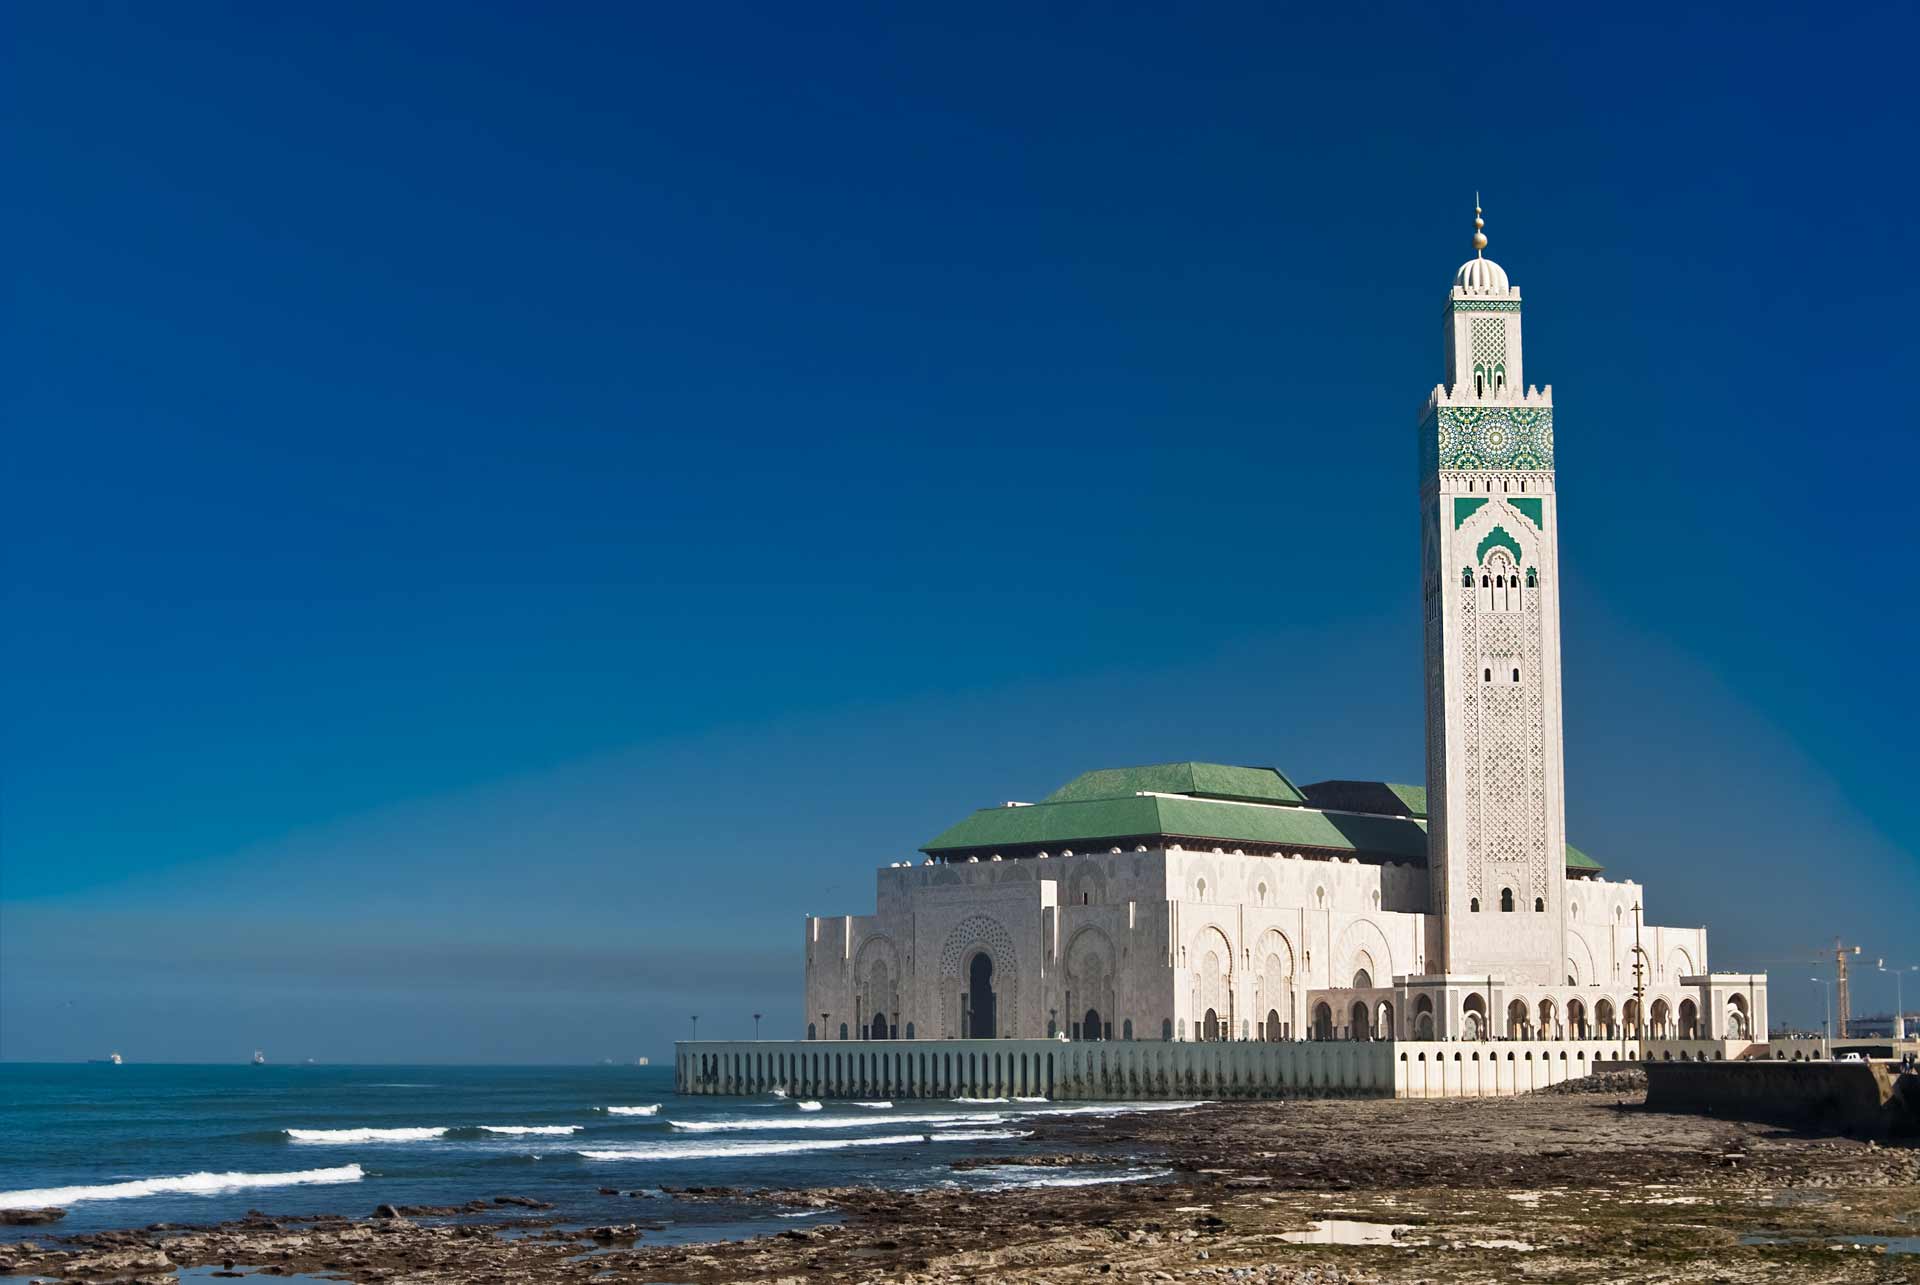 The Hassan II Mosque, located in Casablanca is the largest mosque in Morocco